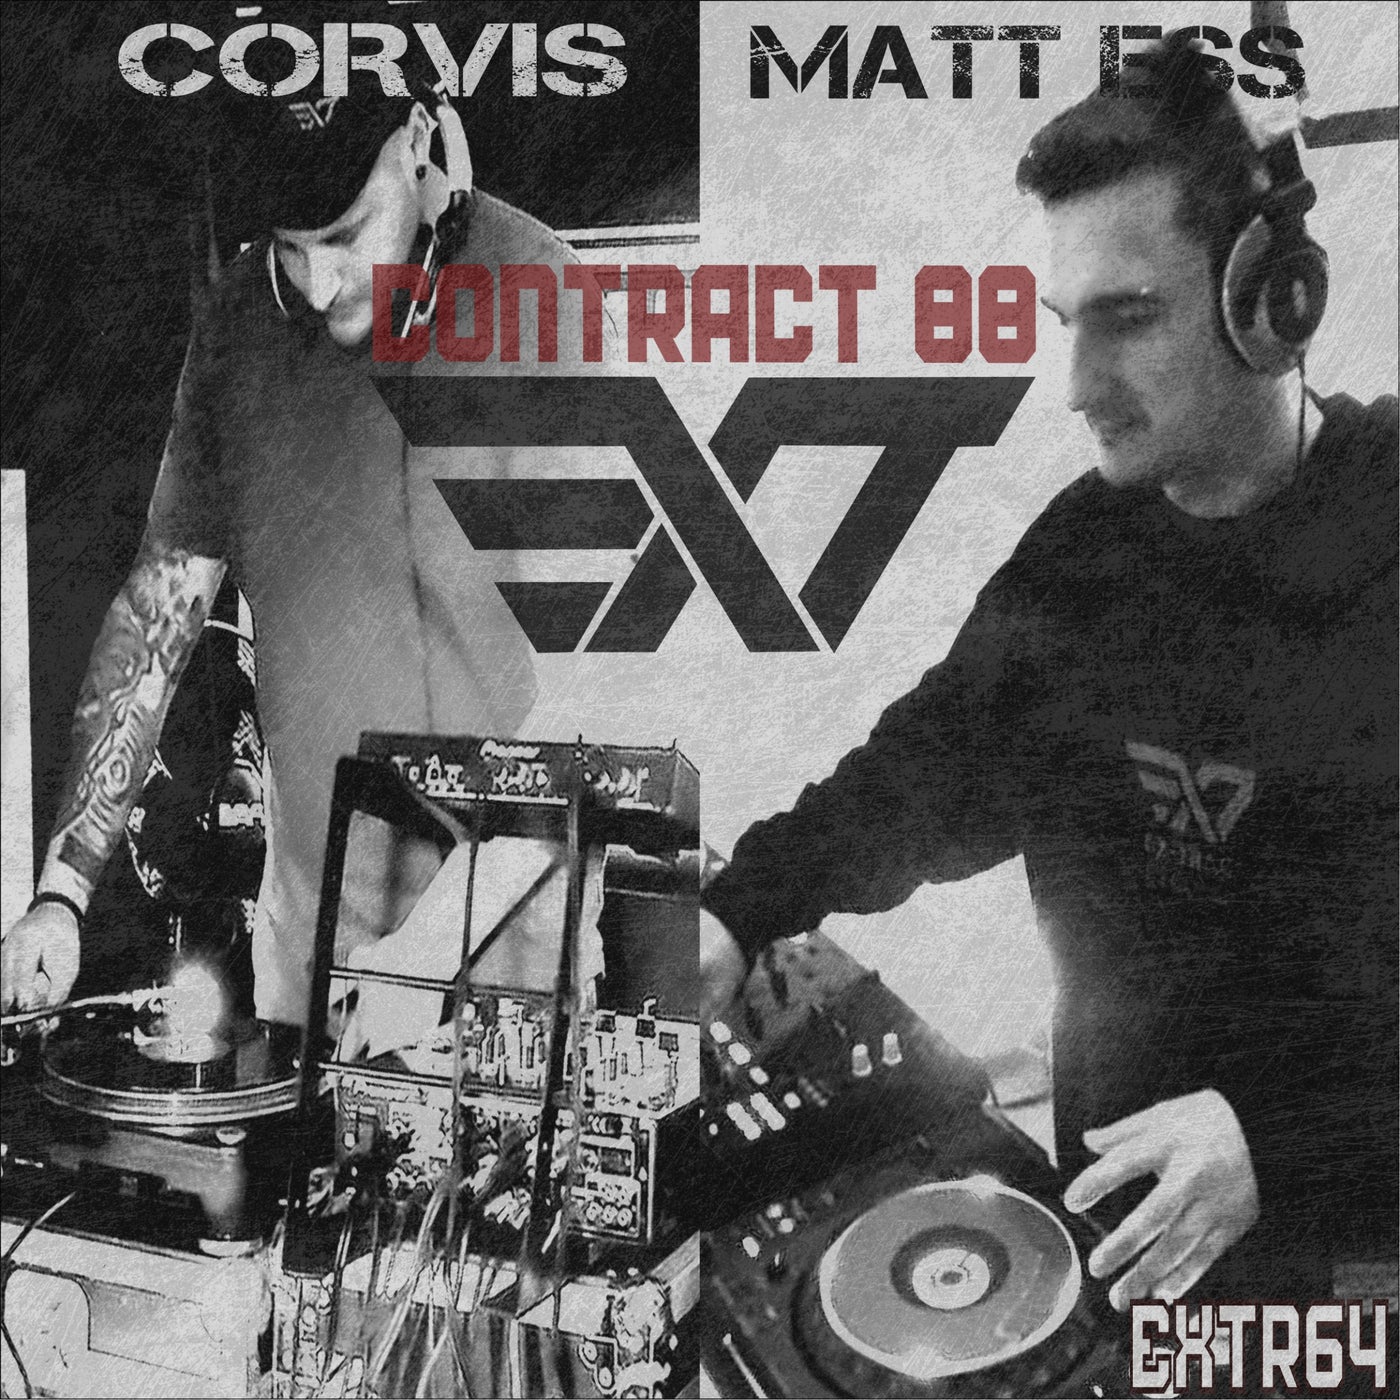 Contract 88